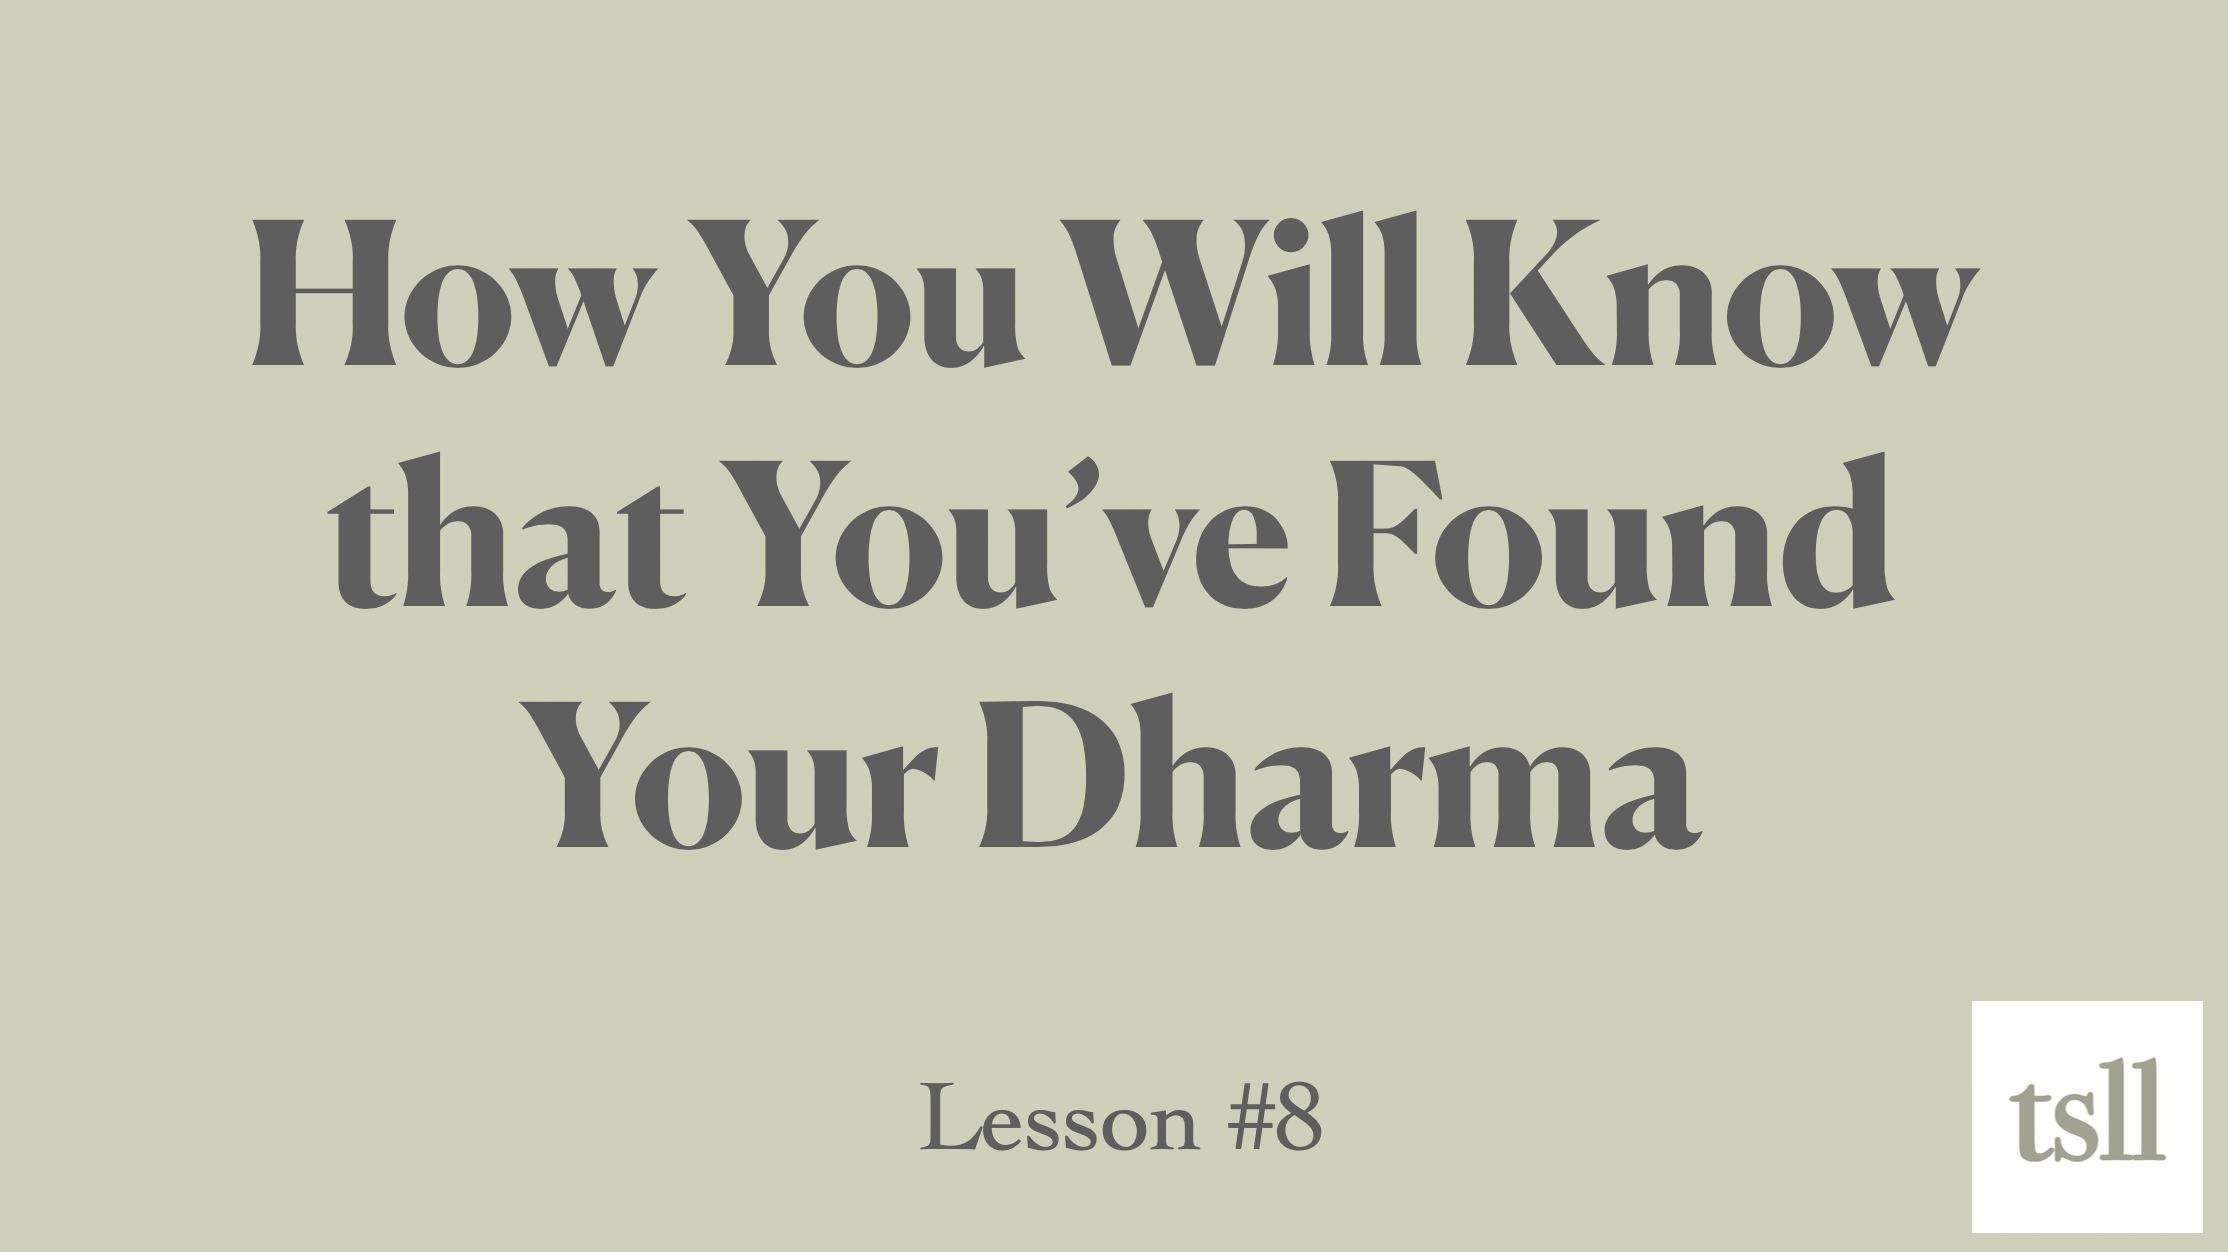 Part 5: Dharma: How You Will Know That You Have Found It, (12:05)